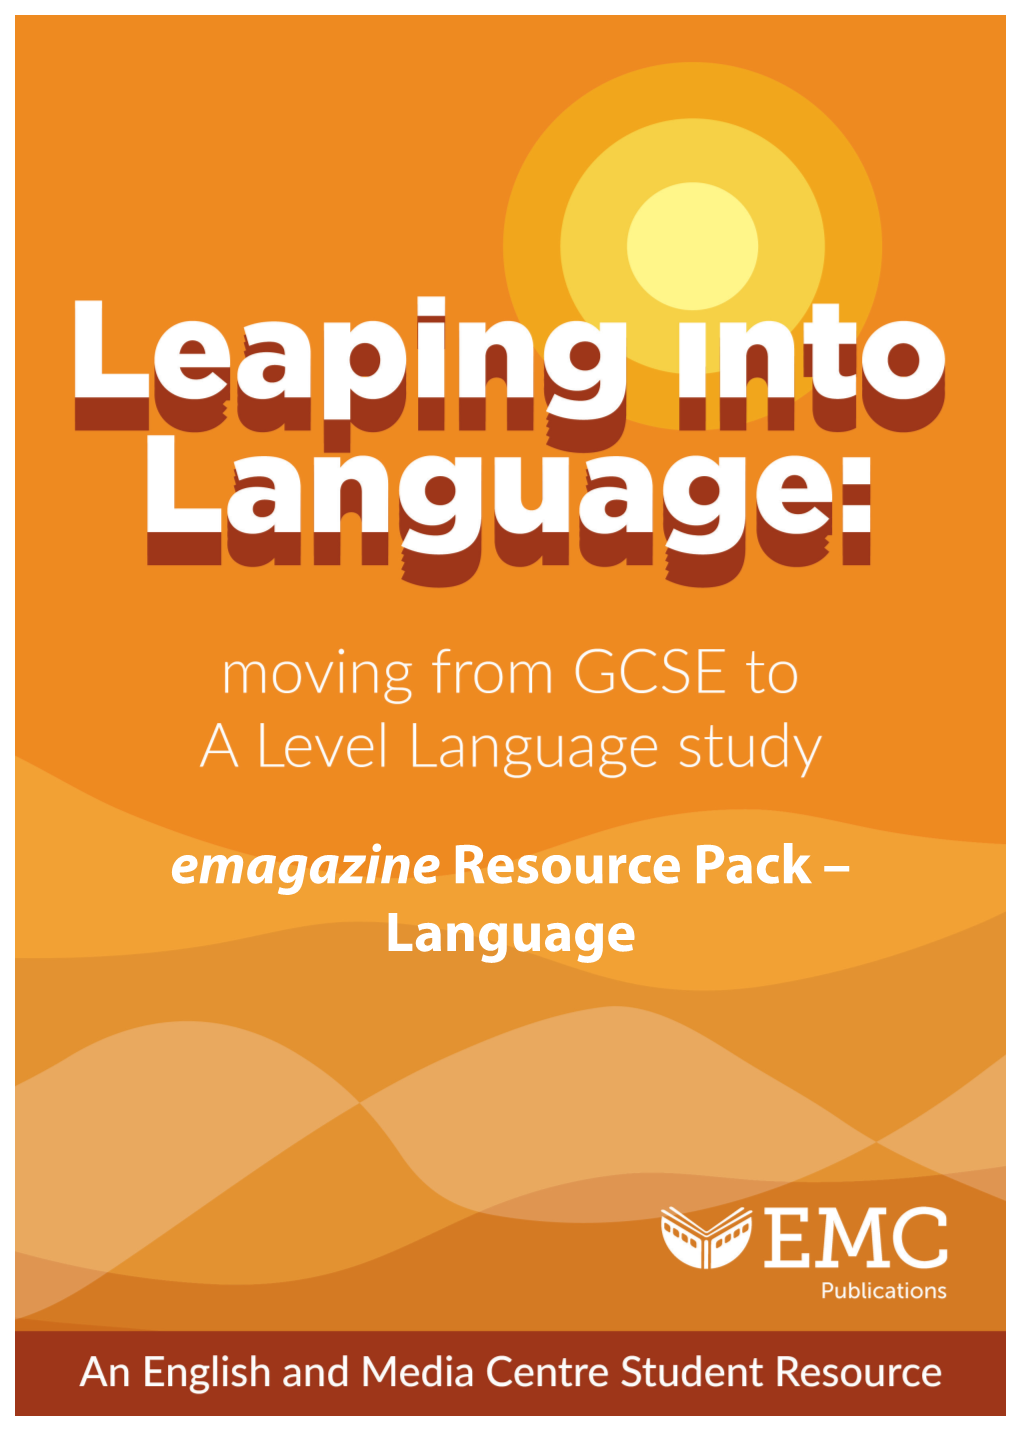 Emagazine Resource Pack – Language This Resource Pack Contains Articles for the Following Activities